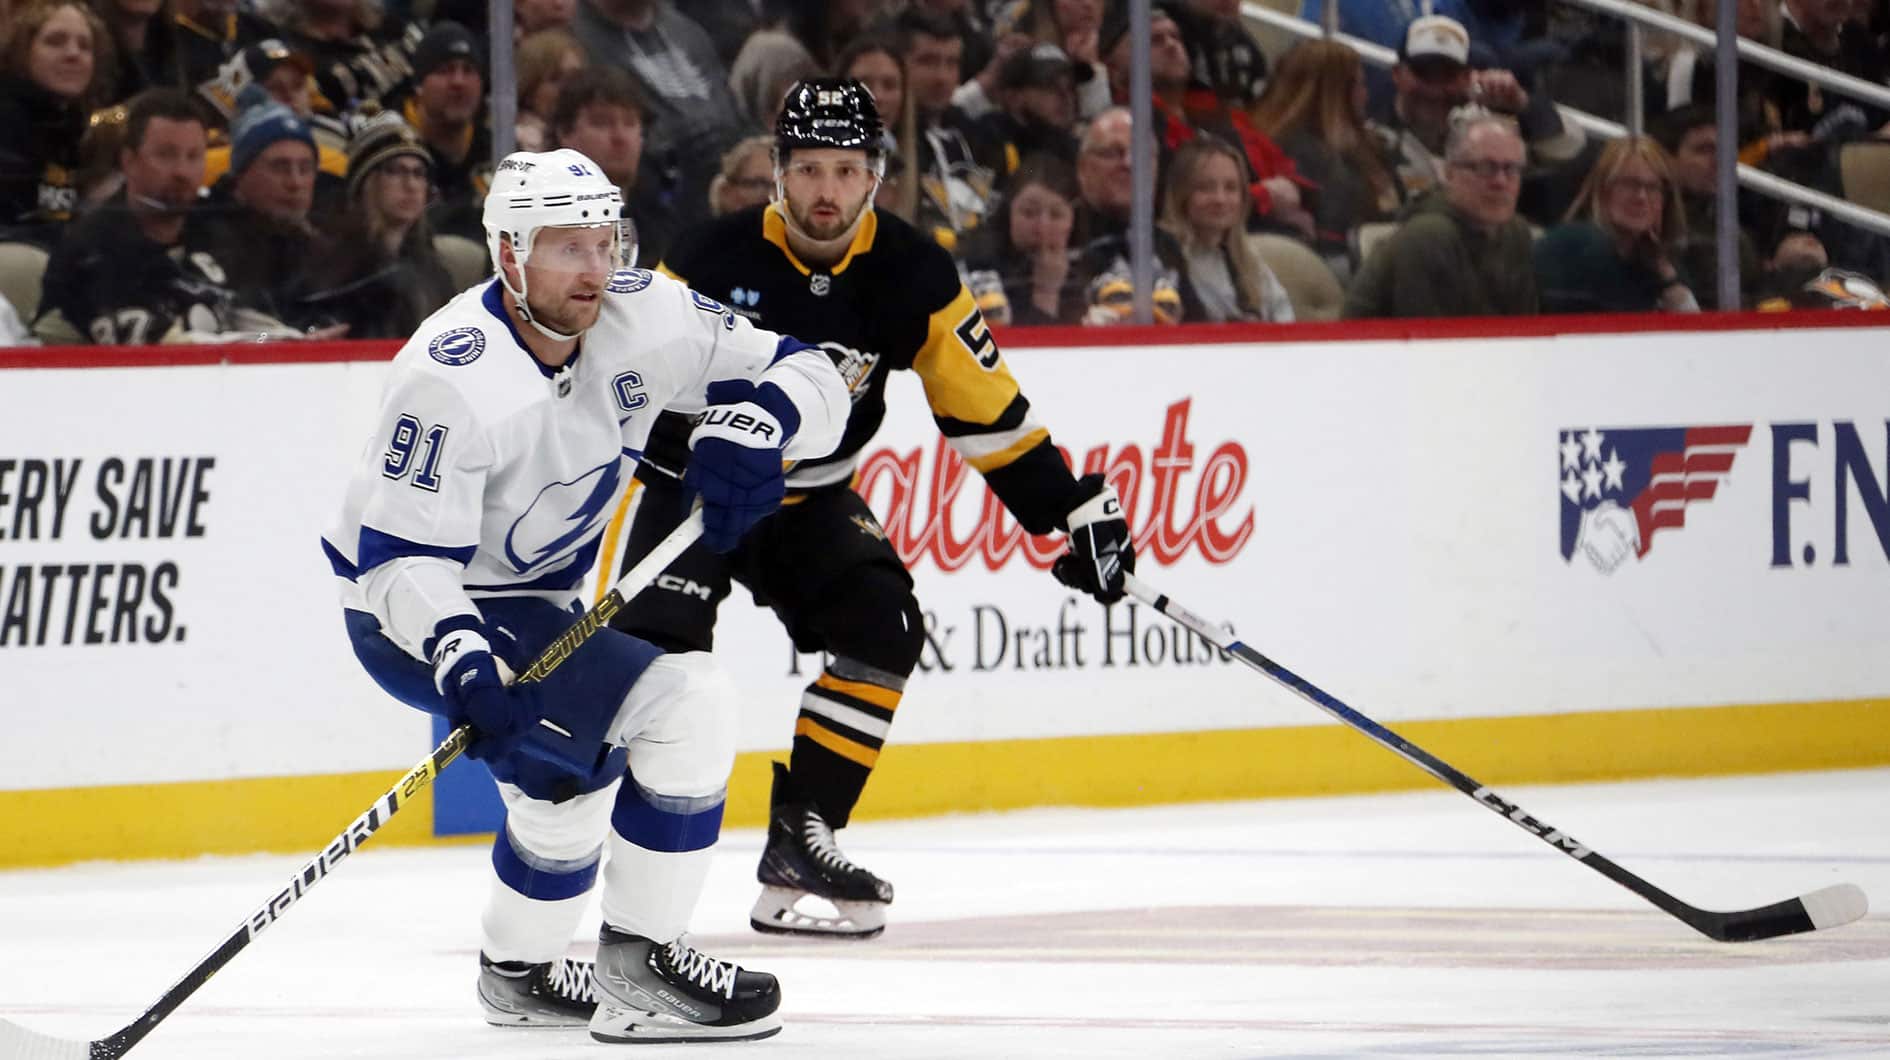 Tampa Bay Lightning center Steven Stamkos (91) handles the puck ahead of Pittsburgh Penguins center Emil Bemstrom (52) during the second period at PPG Paints Arena. The Penguins won 5-4. 